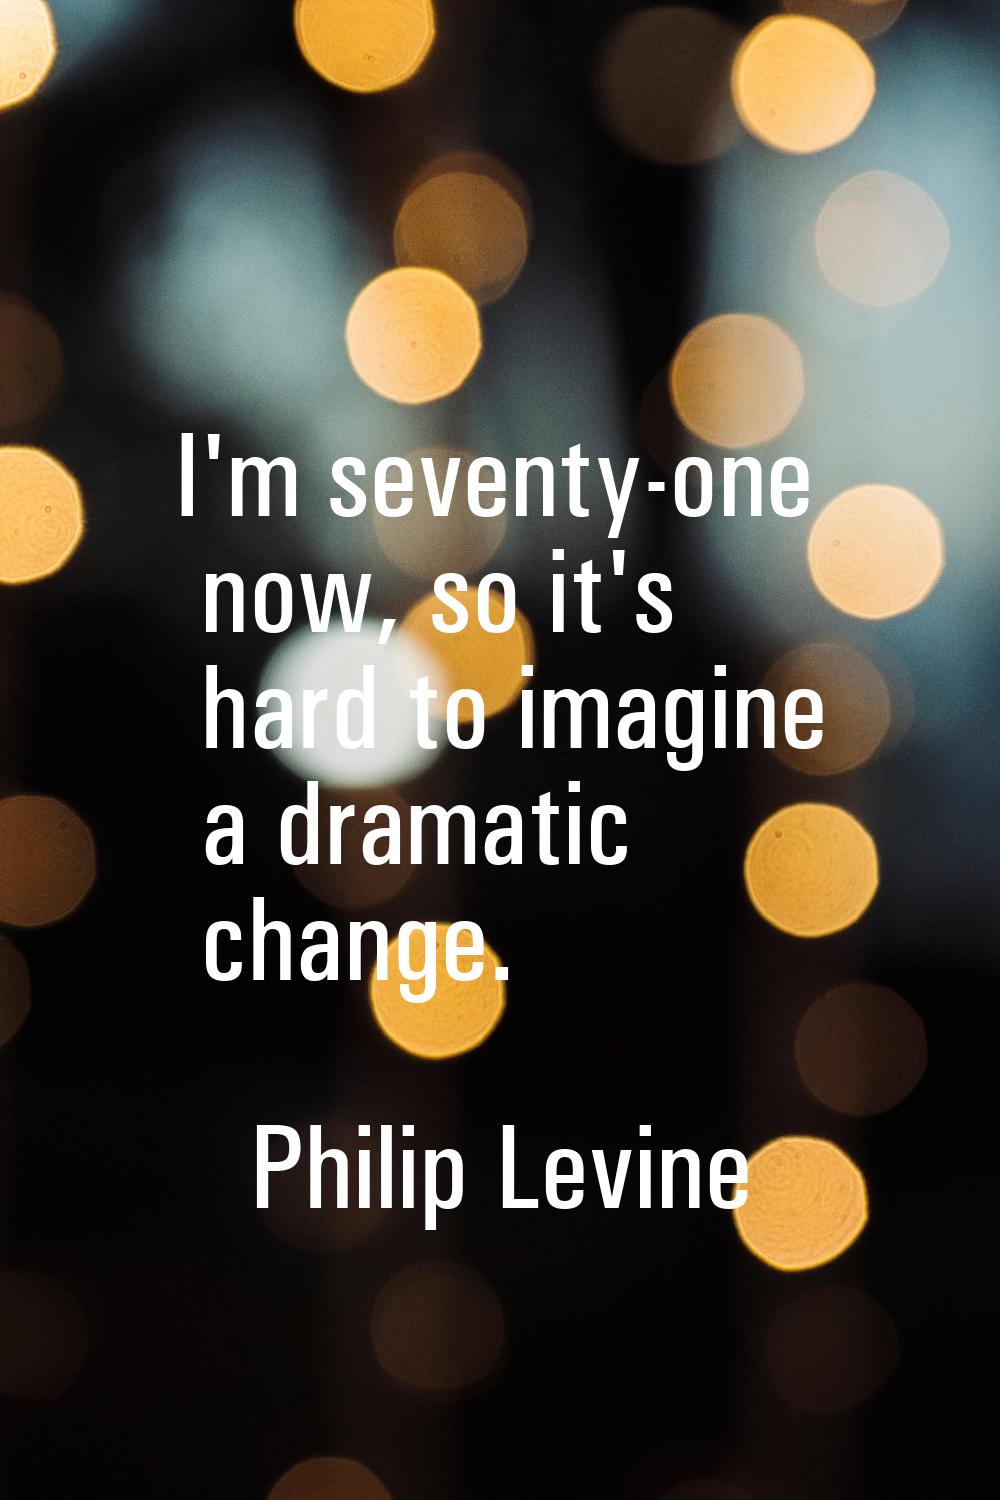 I'm seventy-one now, so it's hard to imagine a dramatic change.